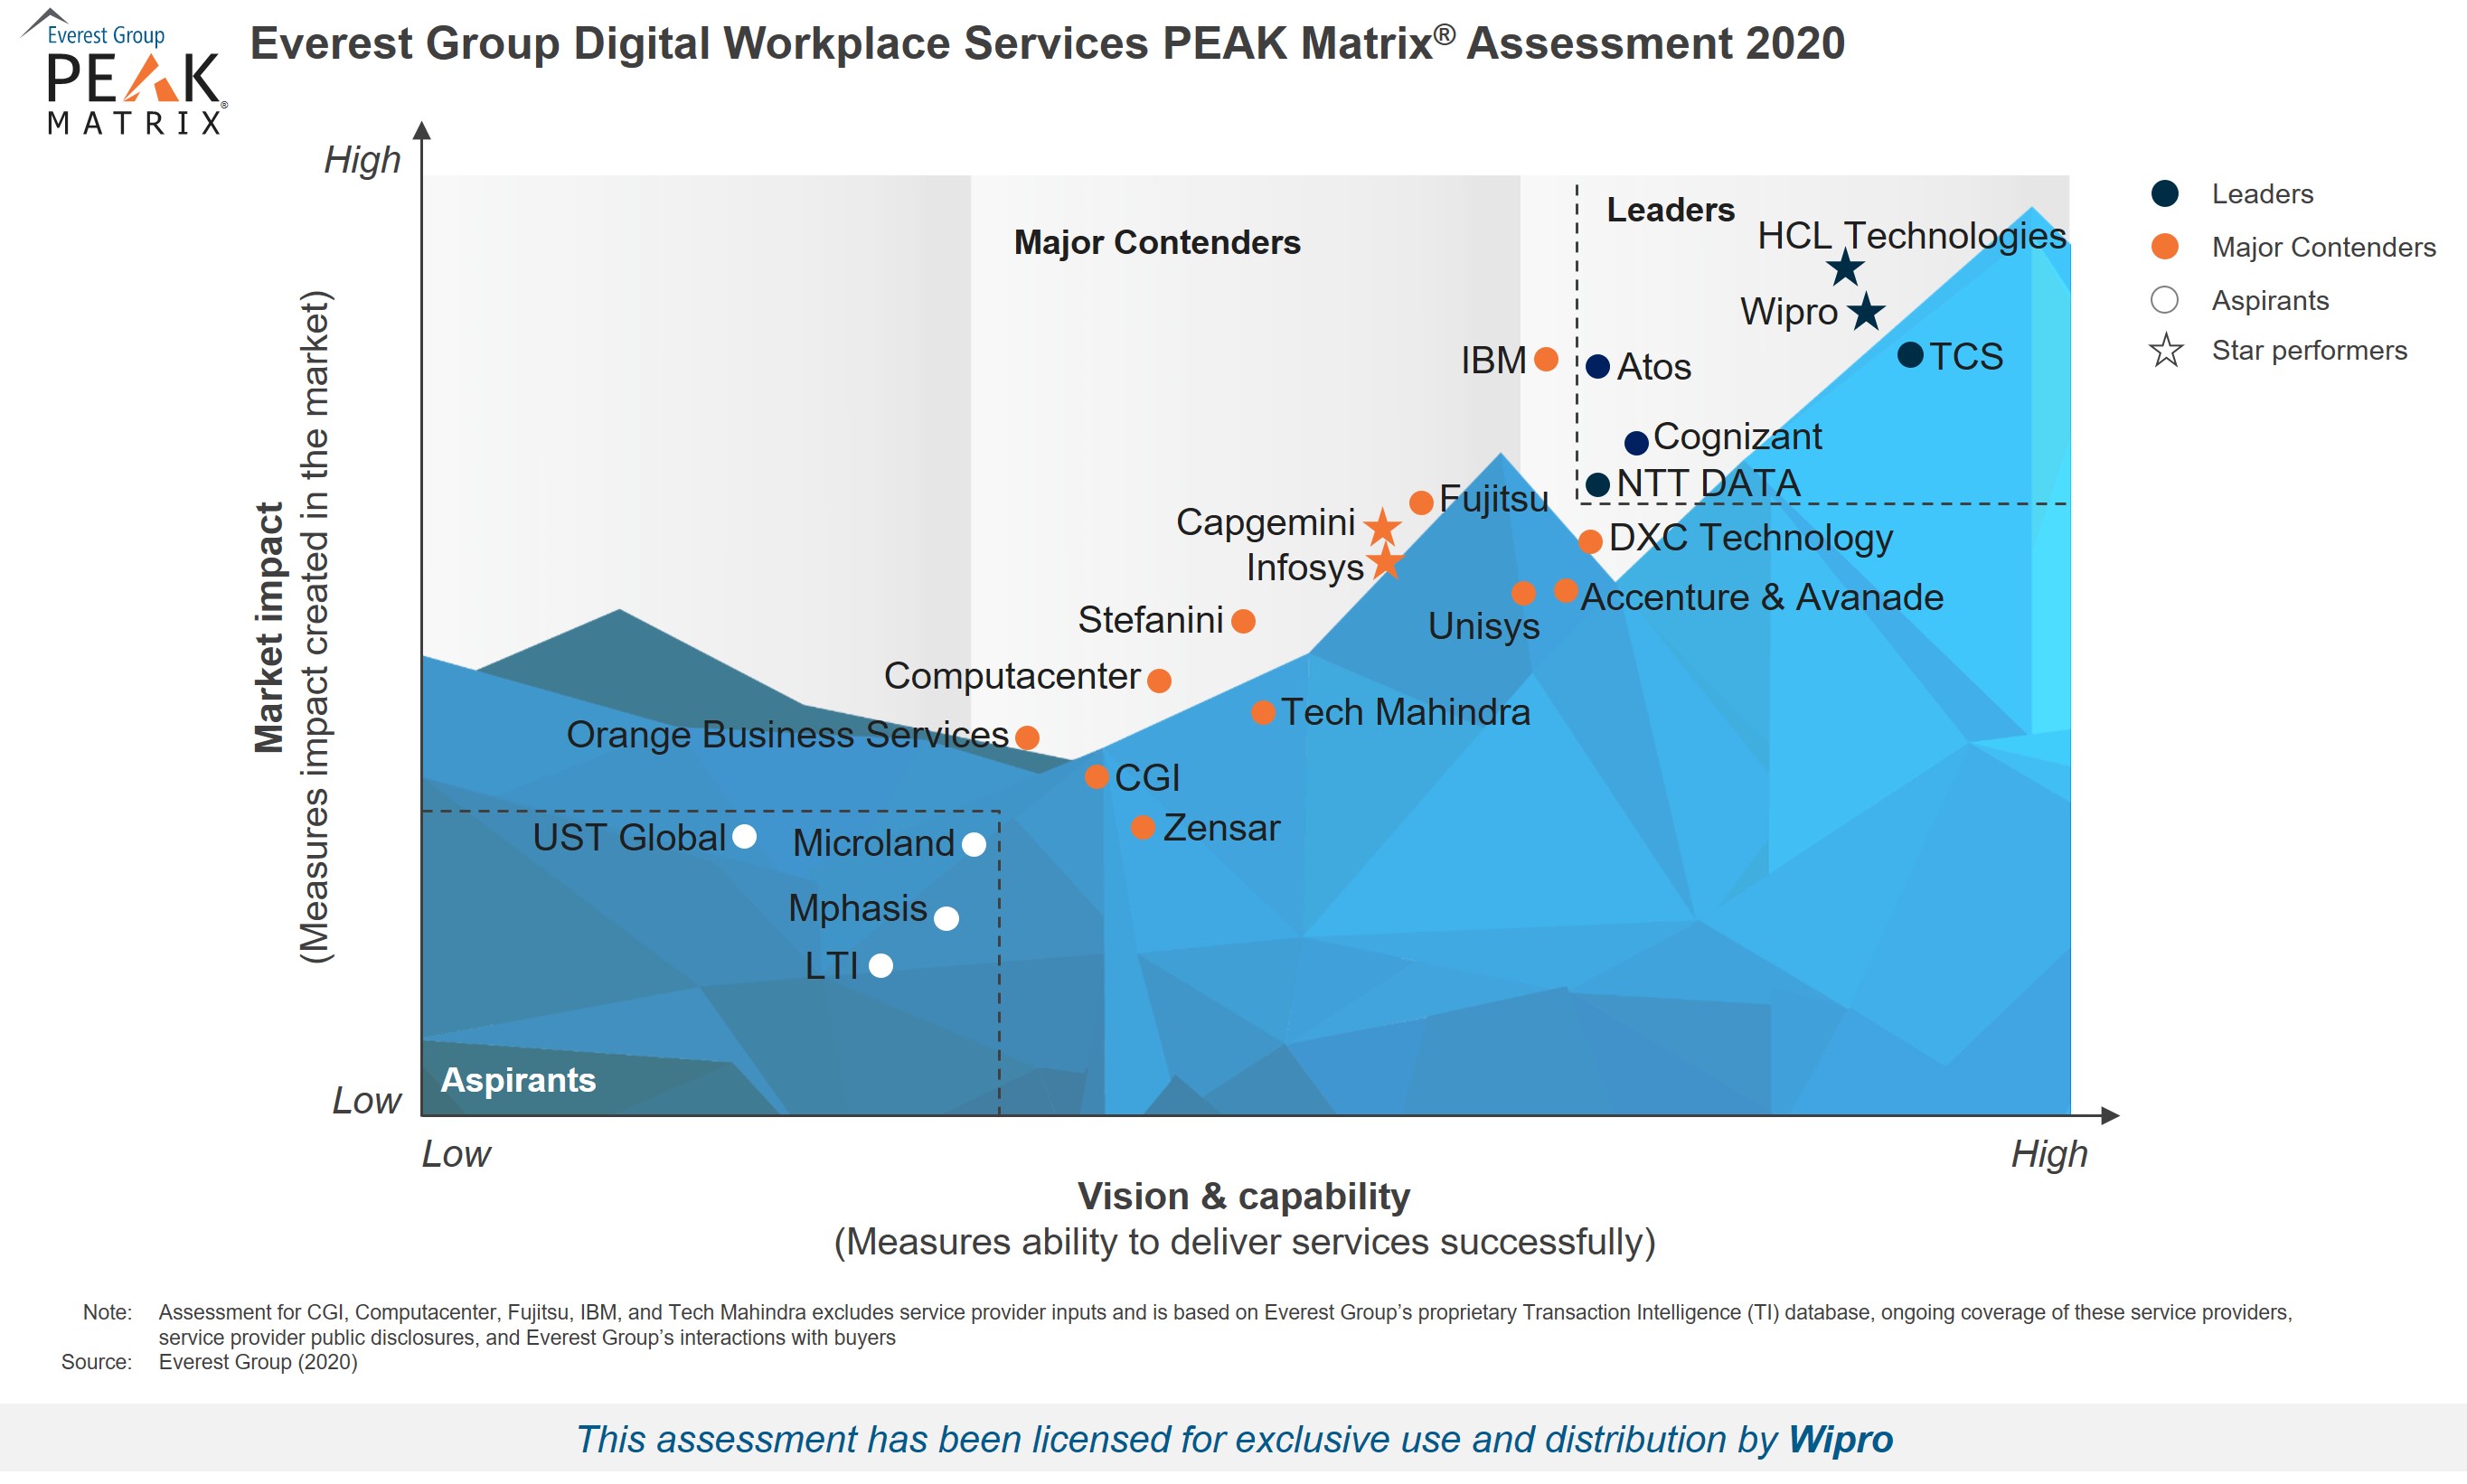 Wipro Rated as a Leader and Star Performer in Everest Group’s Digital Workplace Services PEAK Matrix Assessment 2020